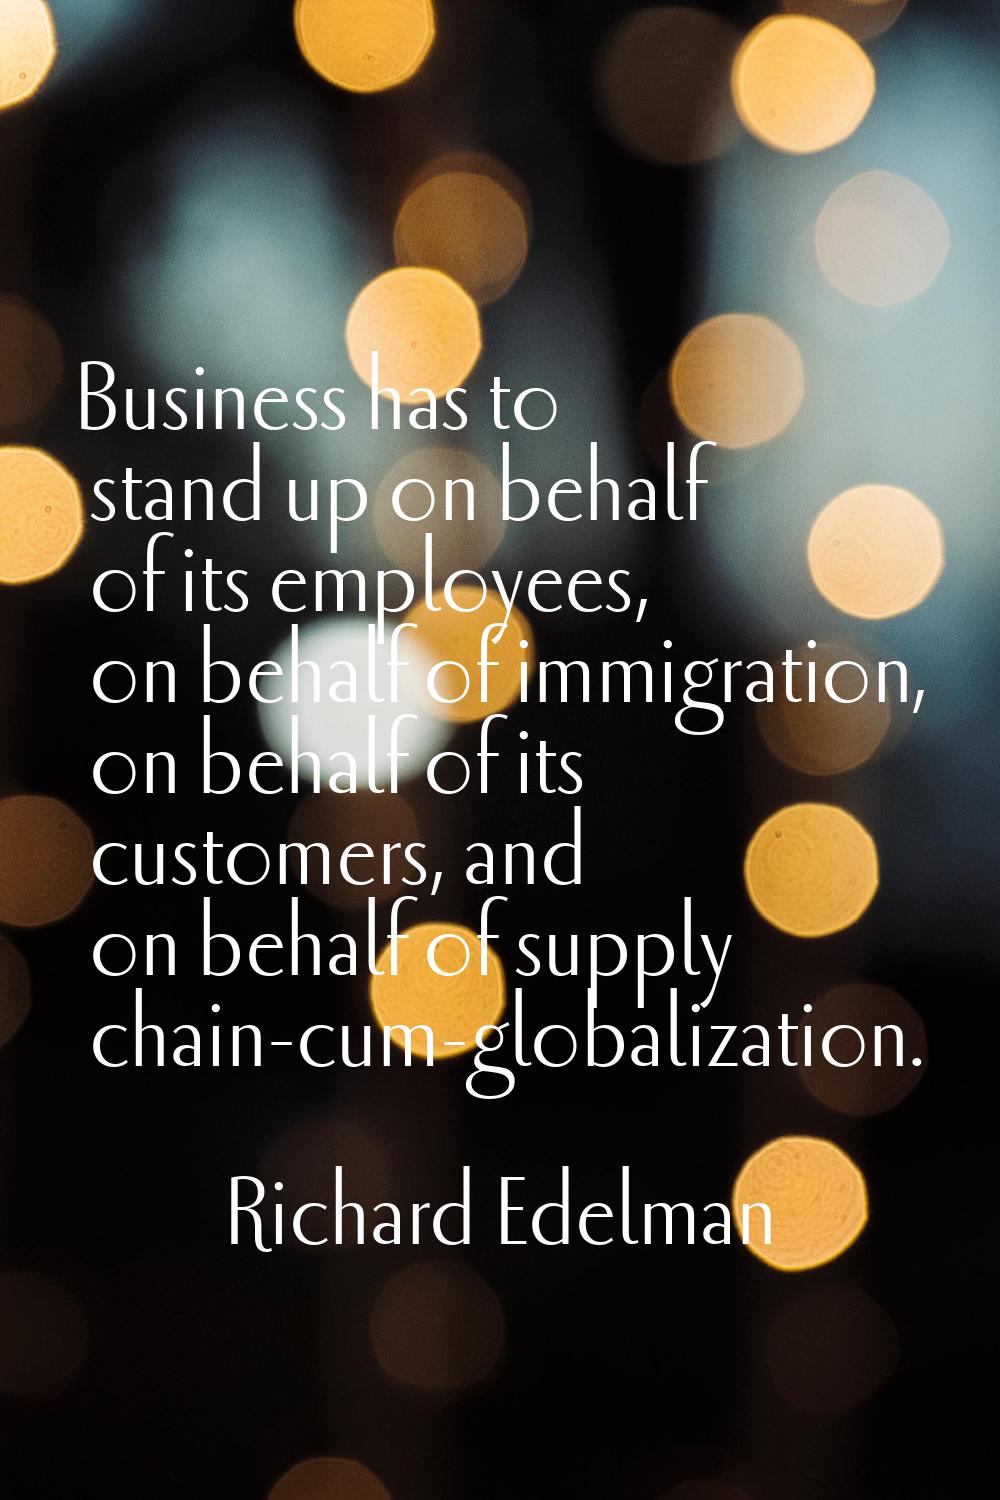 Business has to stand up on behalf of its employees, on behalf of immigration, on behalf of its cus